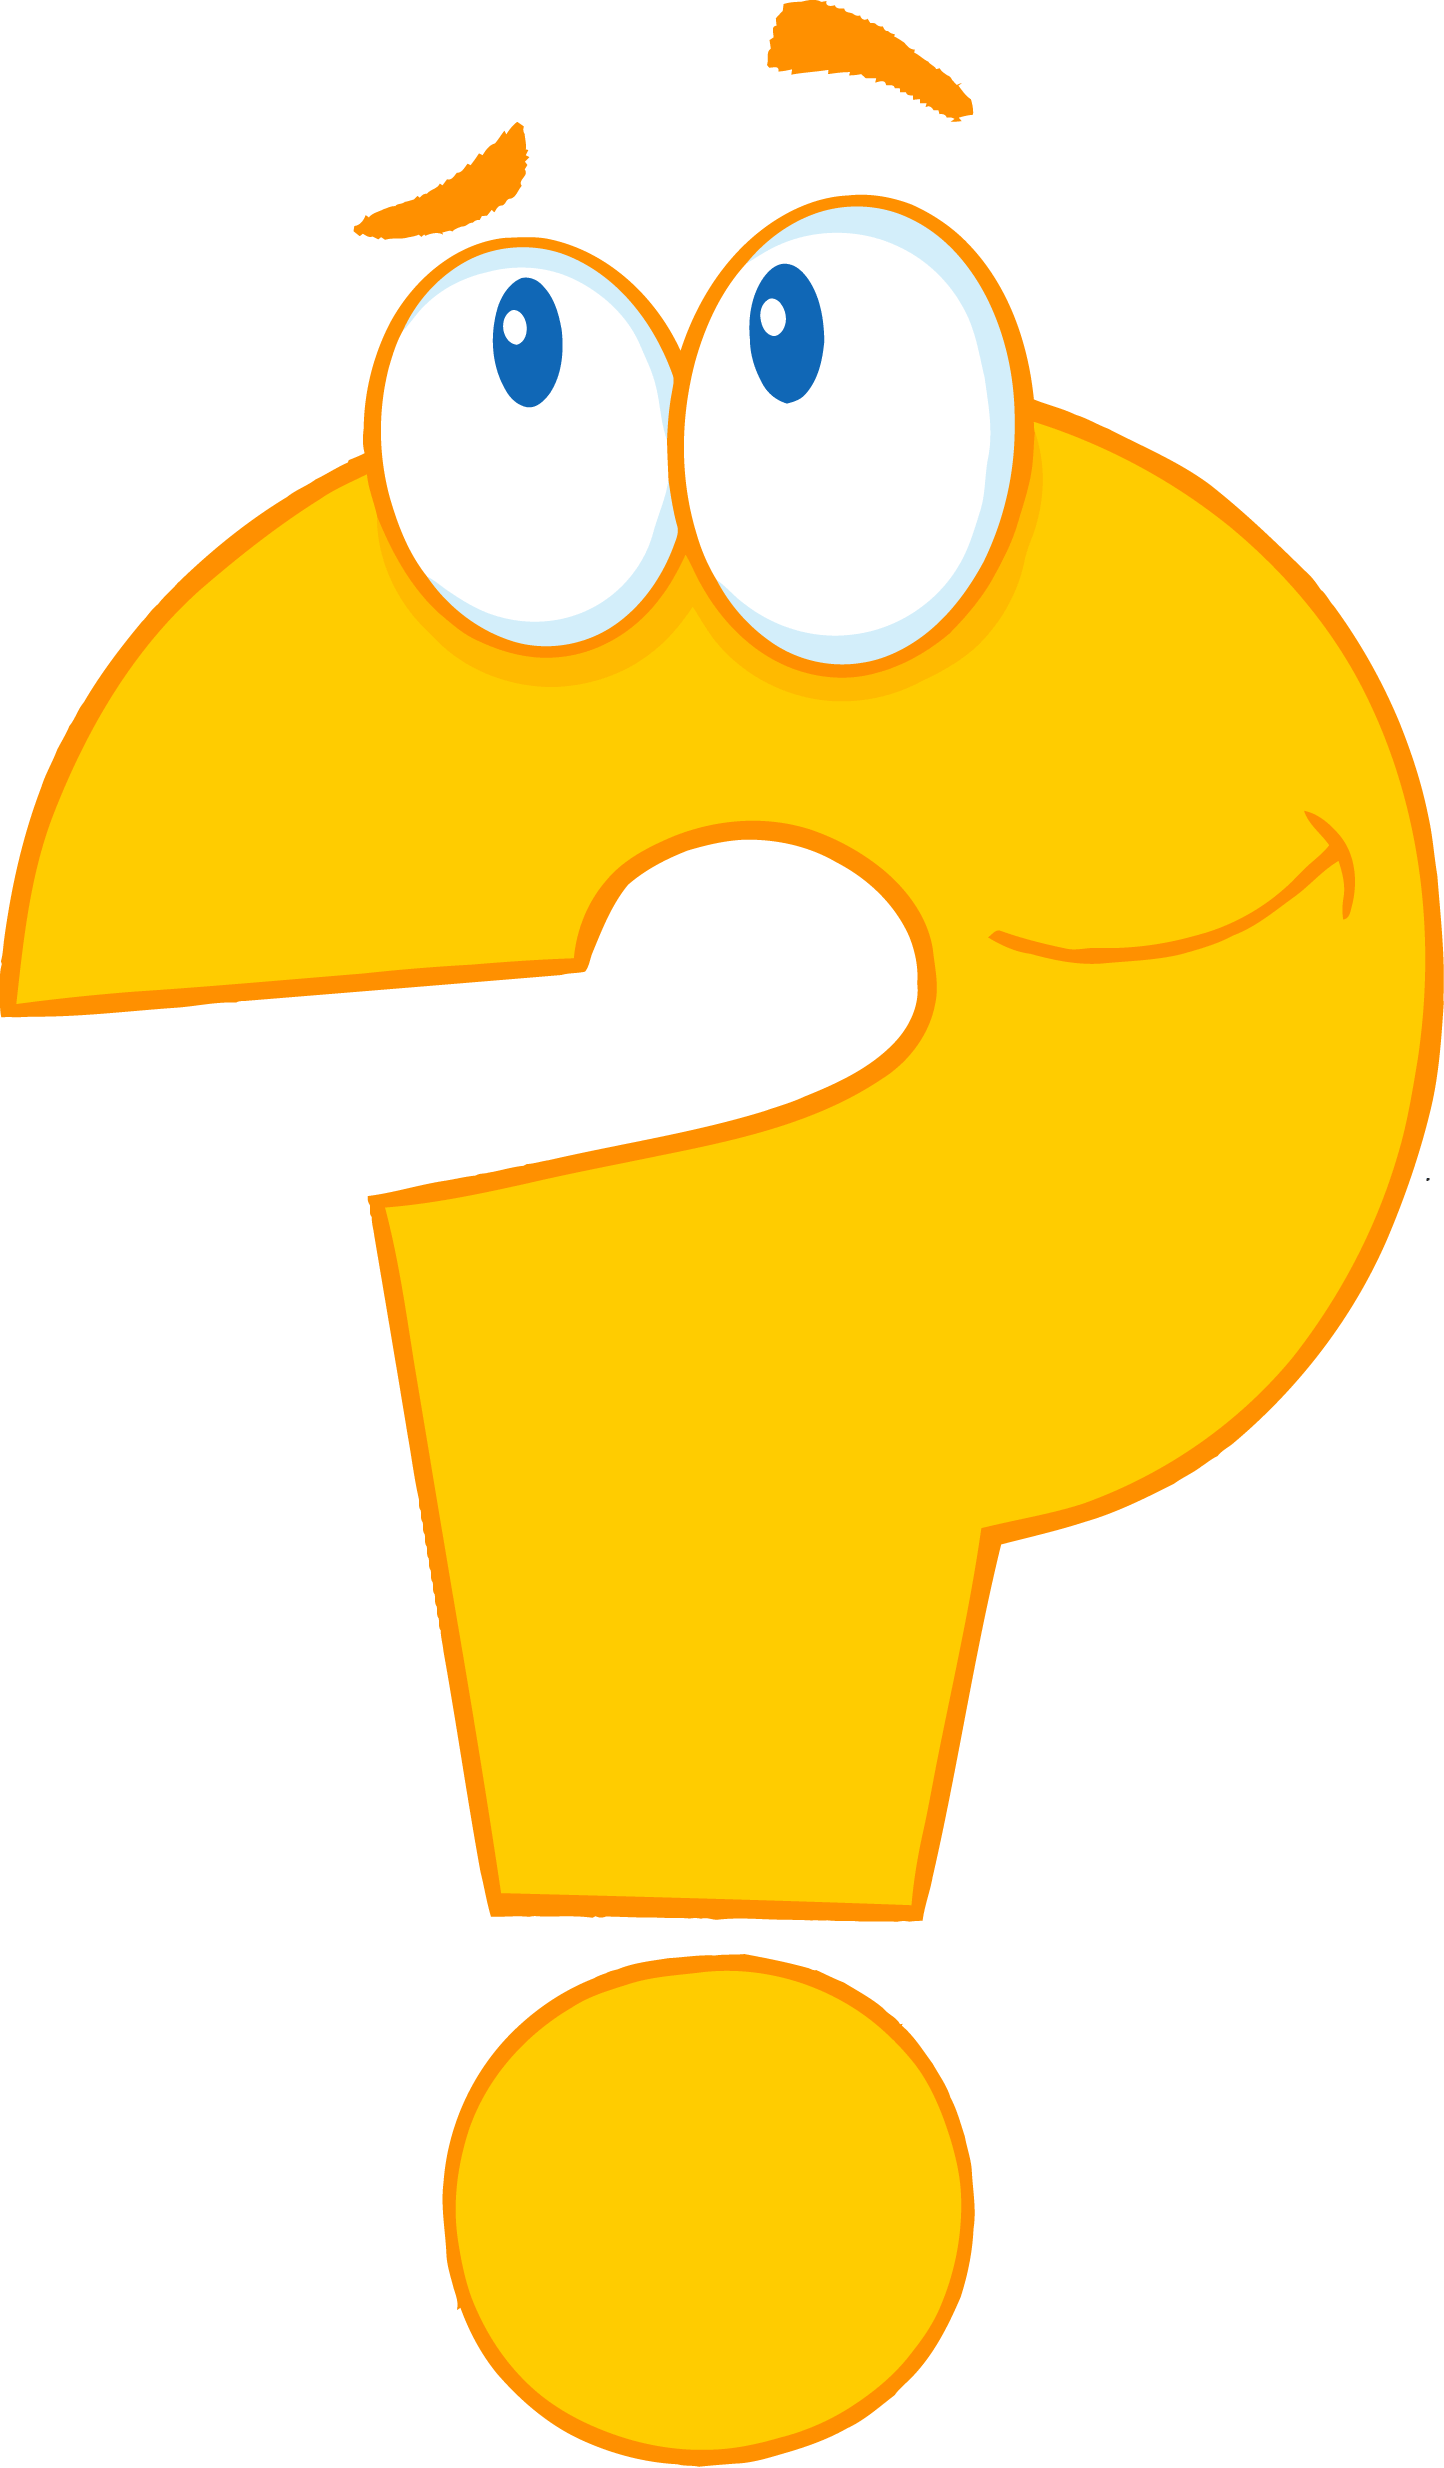 Clipart of question mark